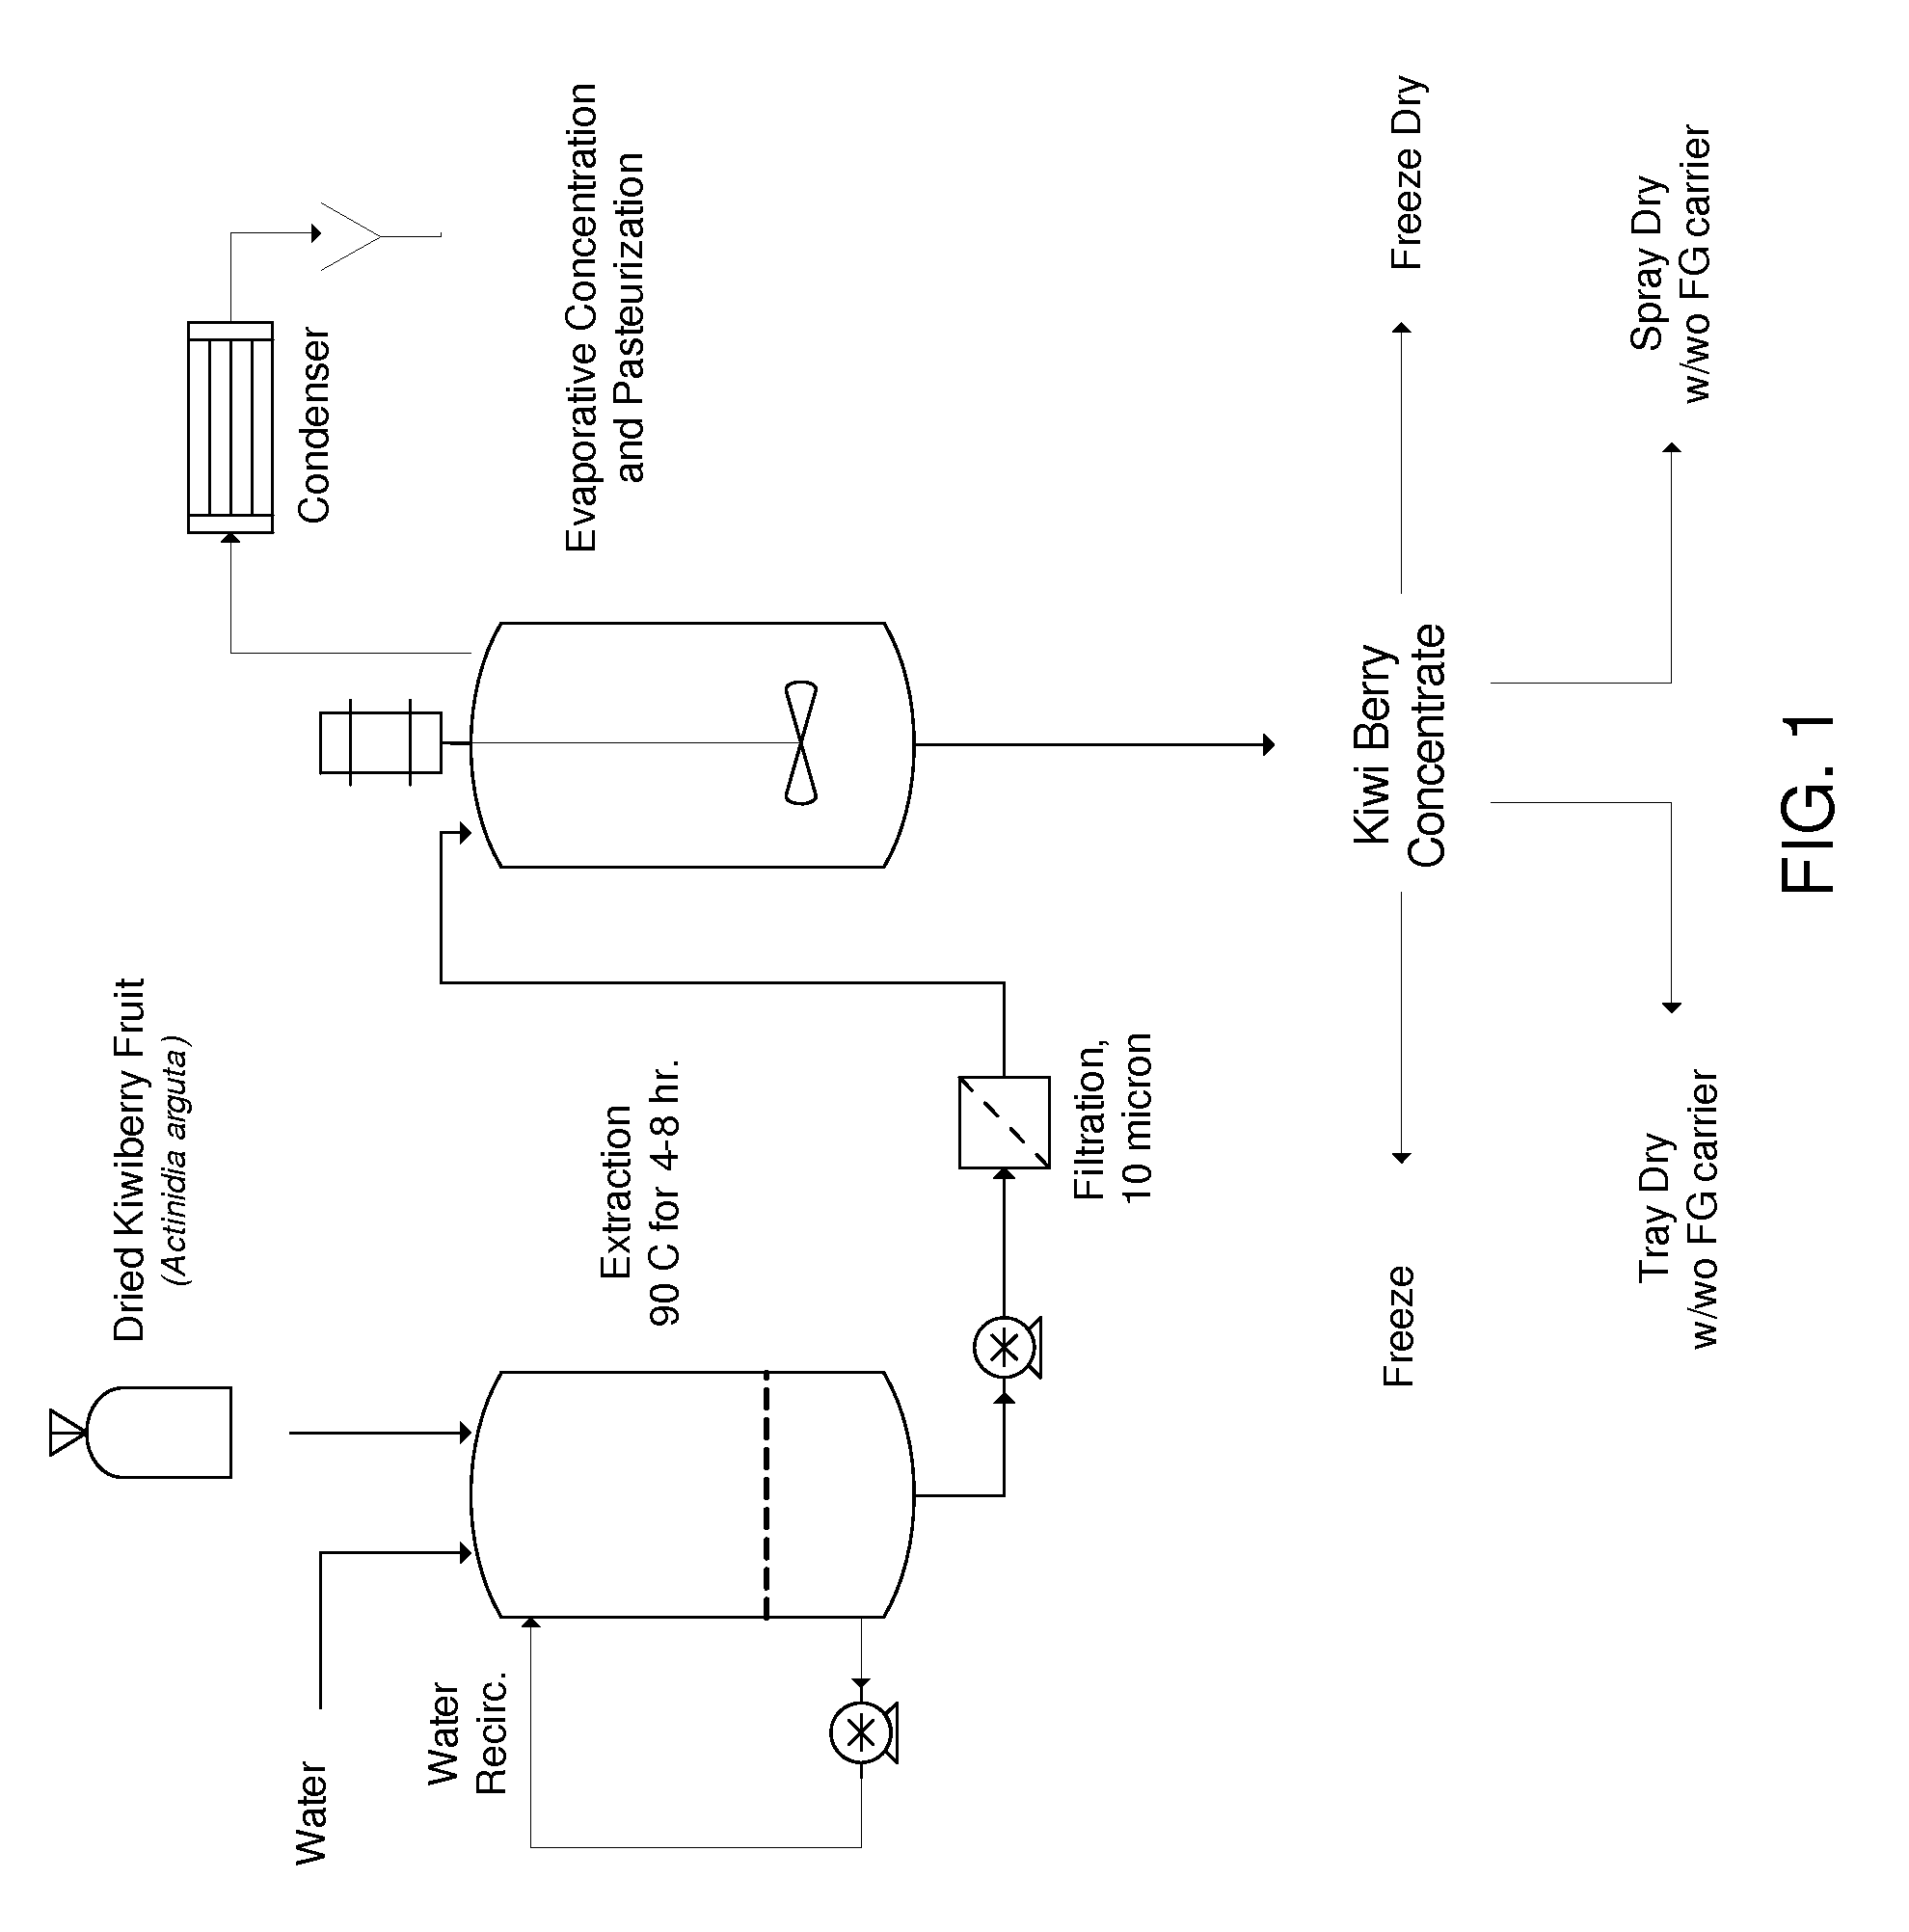 Combination Therapy Comprising Actinidia and Steroids and Uses Thereof